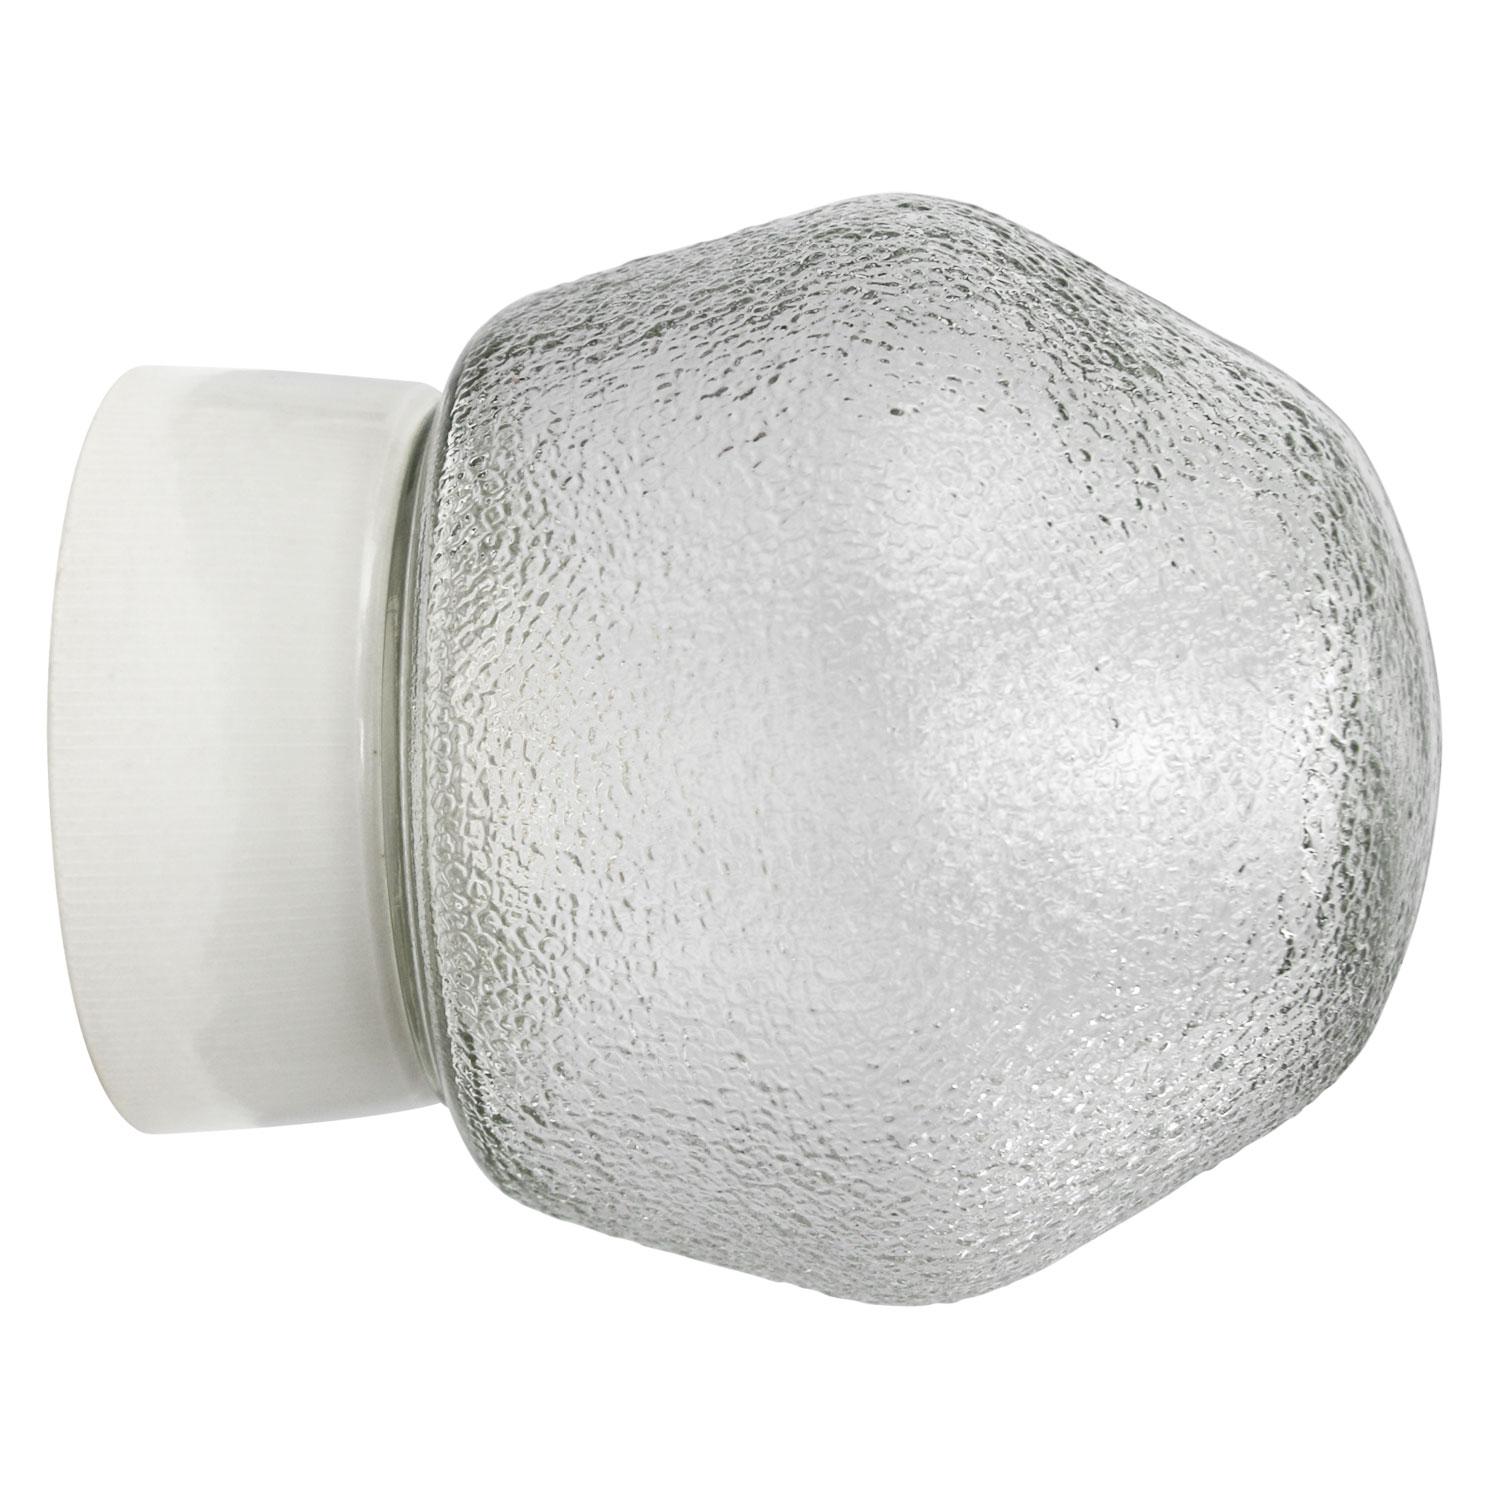 Industrial ceiling lamp.
White porcelain, frosted glass.

2 conductors, no ground.
Suitable for 110 volt USA
new wiring is CE certified (220 volt)  or UL Listed (110 volt) 

Weight: 1.00 kg / 2.2 lb
Priced per individual item. All lamps have been